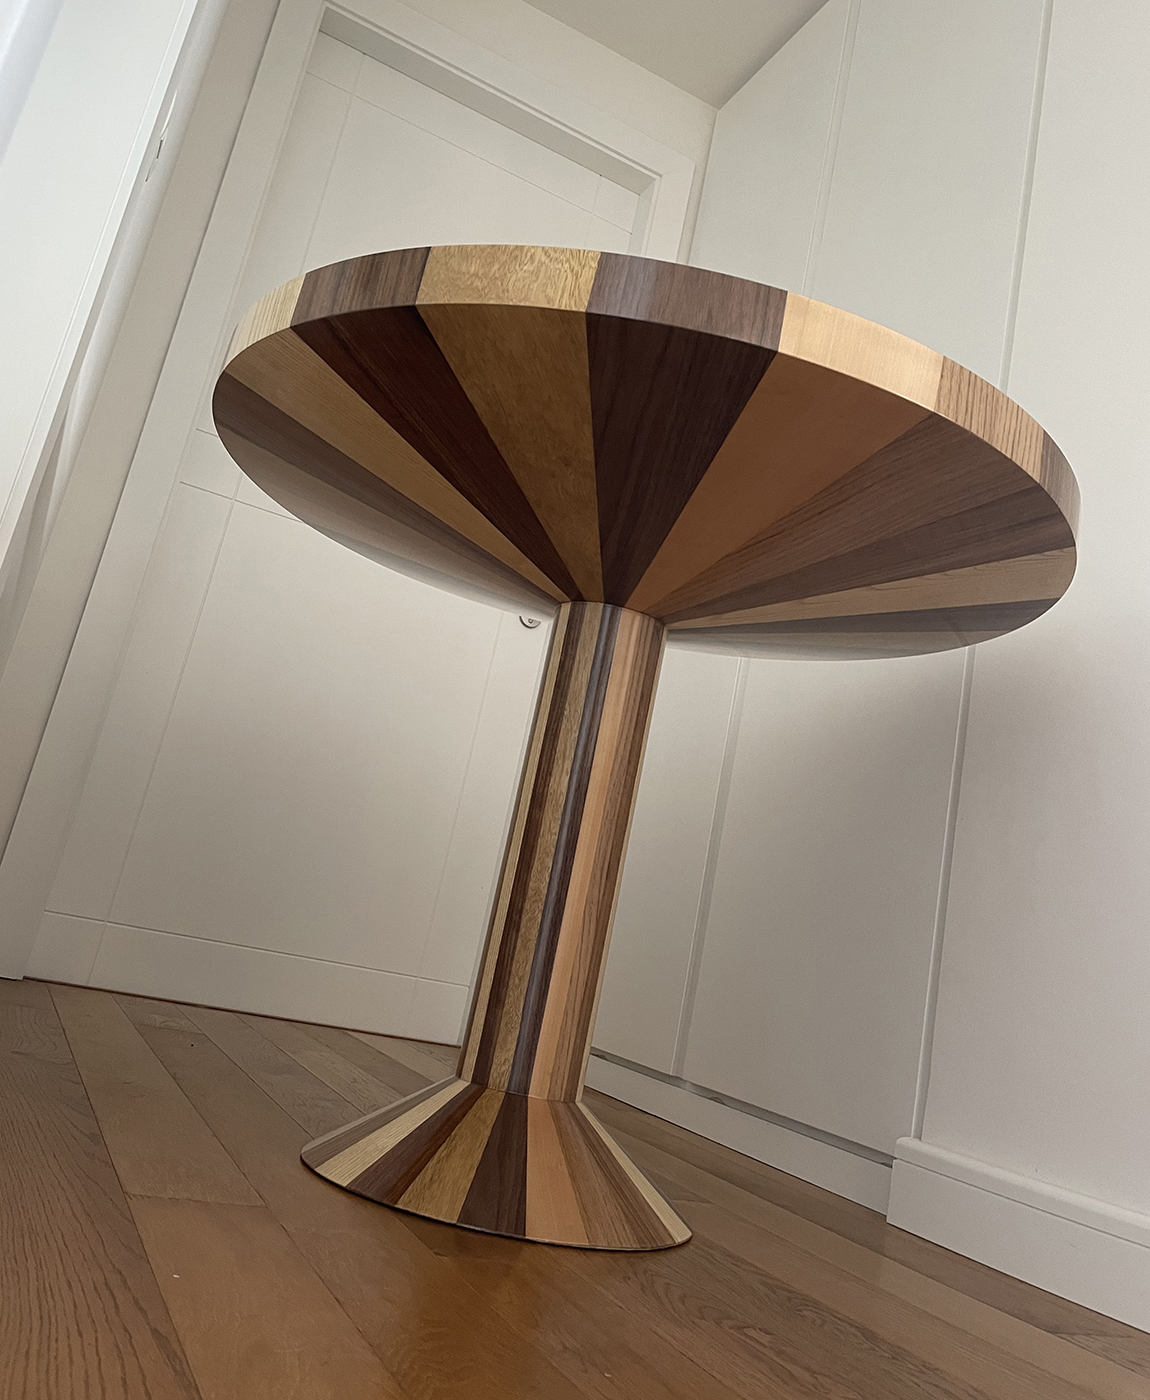 MDDM-Architects-Round-Table-furniture-product-design-wood-studio